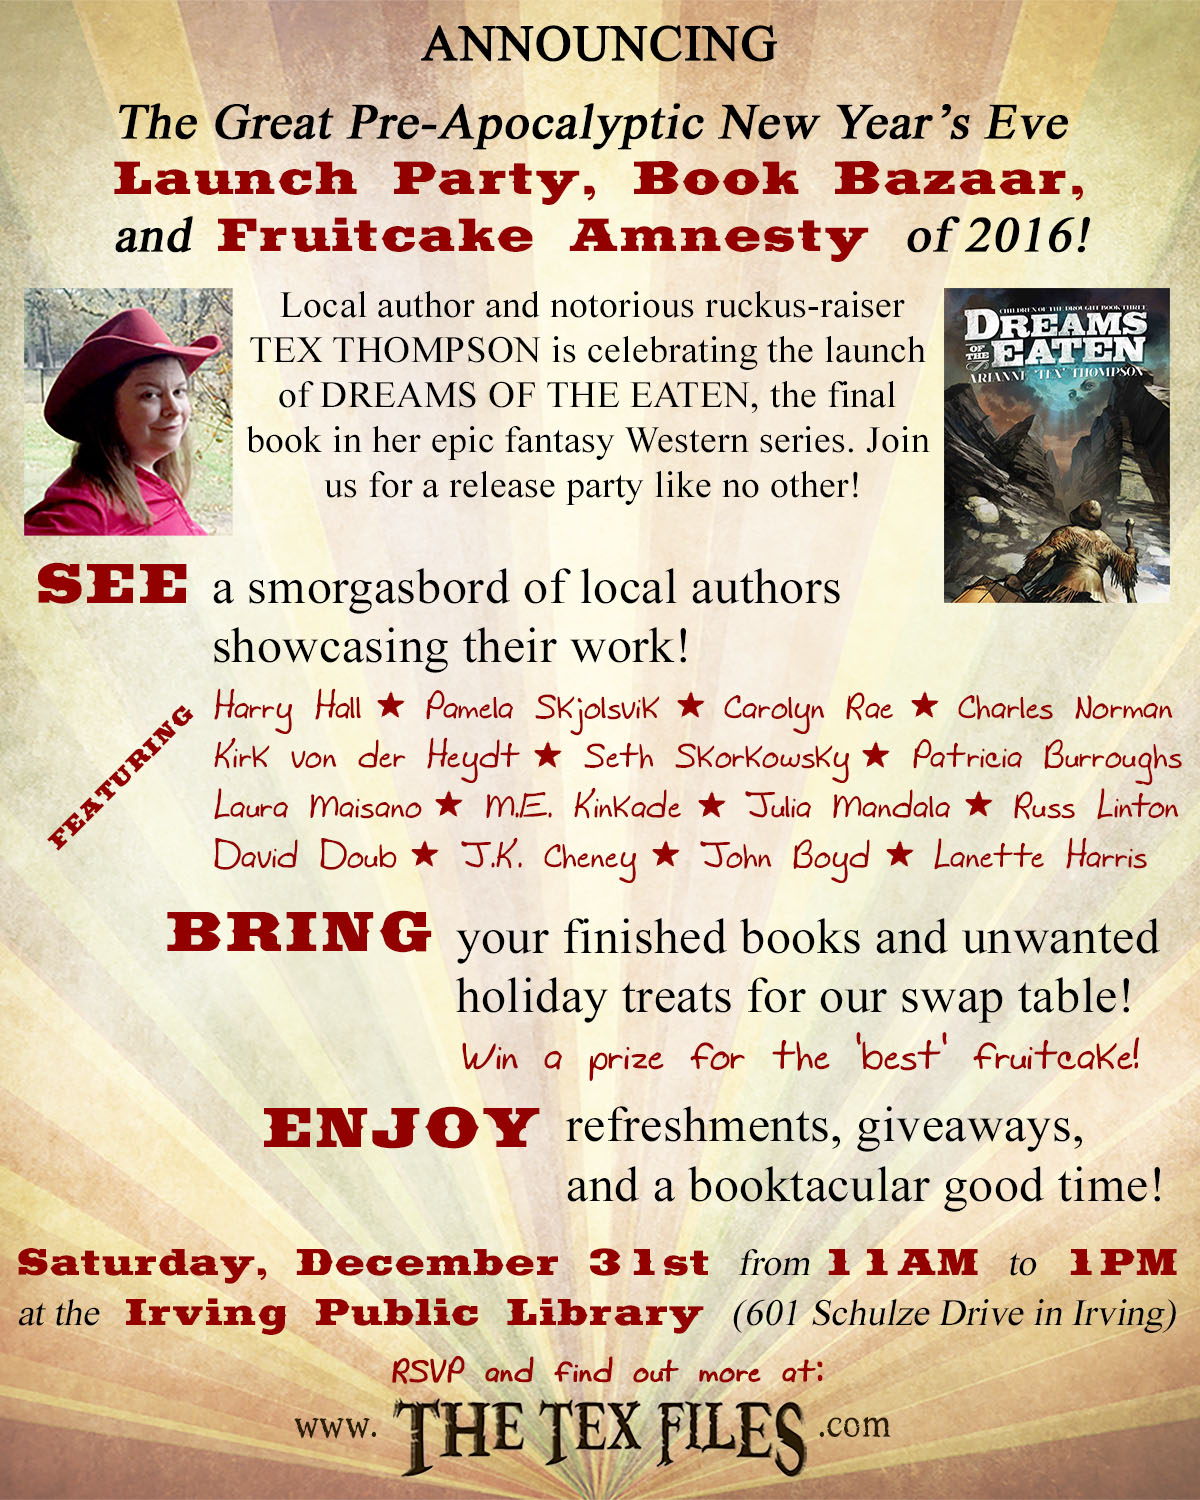 ANNOUNCING the Great Pre-Apocalyptic New Year's Eve Launch Party, Book Bazaar, and Fruitcake Amnesty of 2016! Local author and notorious ruckus-raiser TEX THOMPSON is celebrating the launch of DREAMS OF THE EATEN, the final book in her epic fantasy Western series. Join us for a release party like no other!  SEE a smorgasbord of local authors showcasing their work. BRING your finished books and unwanted holiday treats for the swap table. (Win a prize for the "best" fruitcake!) ENJOY refreshments, giveaways, and a booktacular good time!  SATURDAY, DECEMBER 31st from 11AM to 1PM at the Irving Public Library, South Branch (601 Schulze Drive in Irving). RSVP and find out more at www.TheTexFiles.com